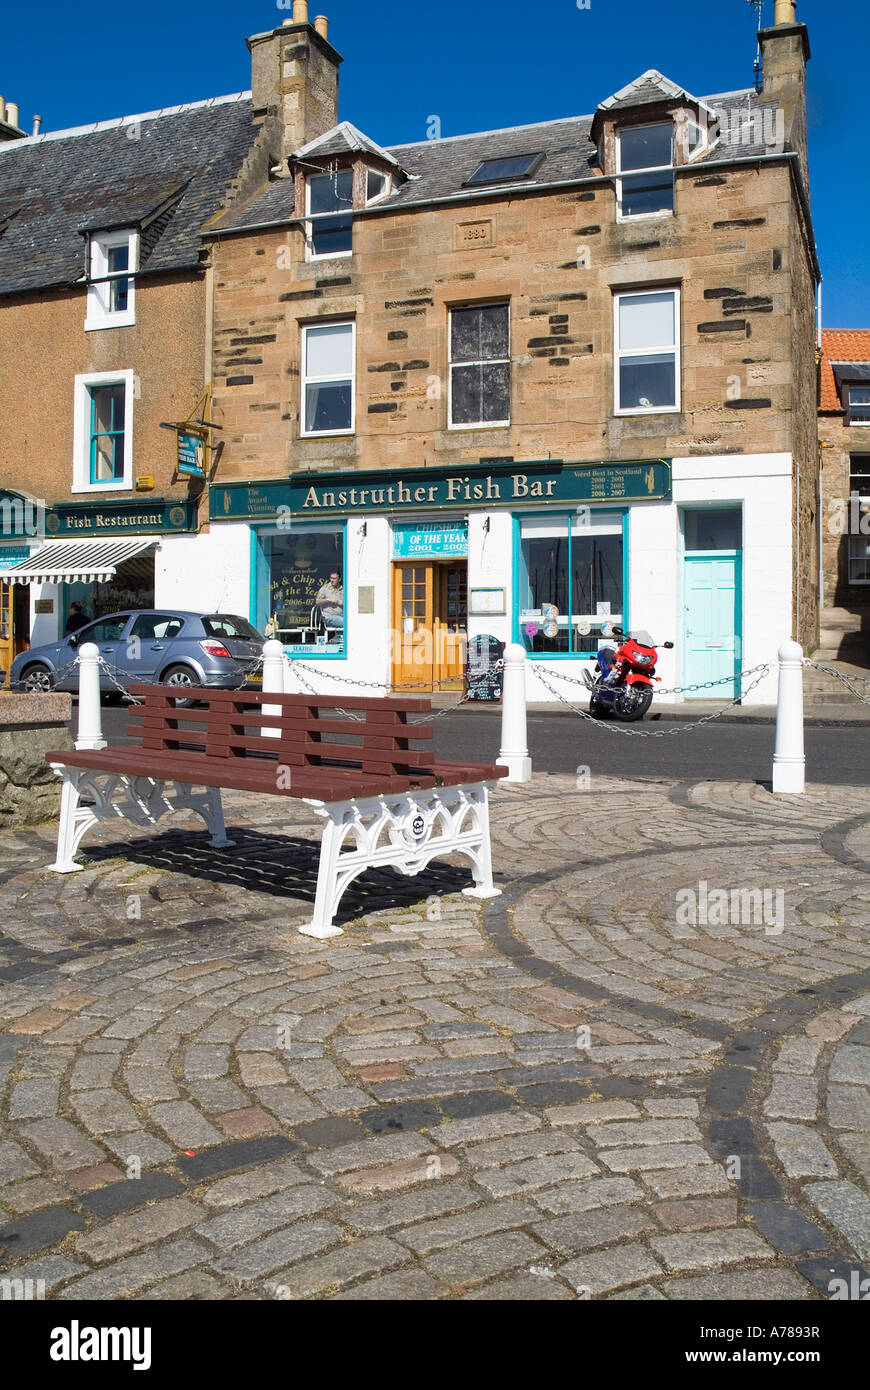 dh Scottish Fish Bar restaurant ANSTRUTHER EAST NEUK FIFE SCOTLAND Cobbled sitting out area famous Fish Chip shop seafood cafe front Stock Photo